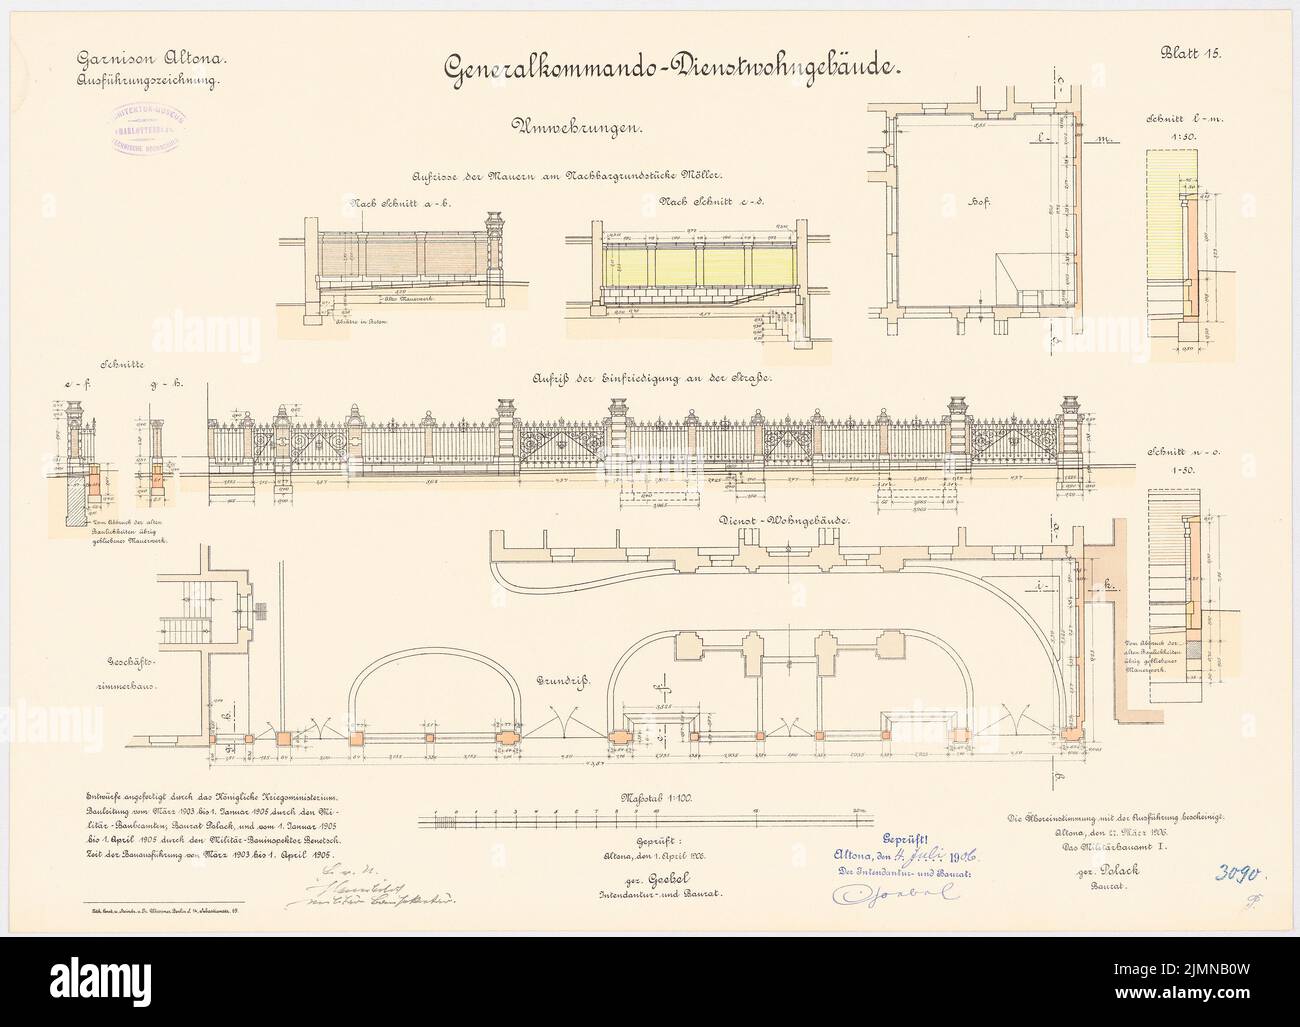 Pollack, garrison in Hamburg. Handling of the General Commandant (1903-1905): Environment in floor plans, torture, cuts 1: 100. Lithograph, 46.8 x 64.9 cm (including scan edges) Stock Photo